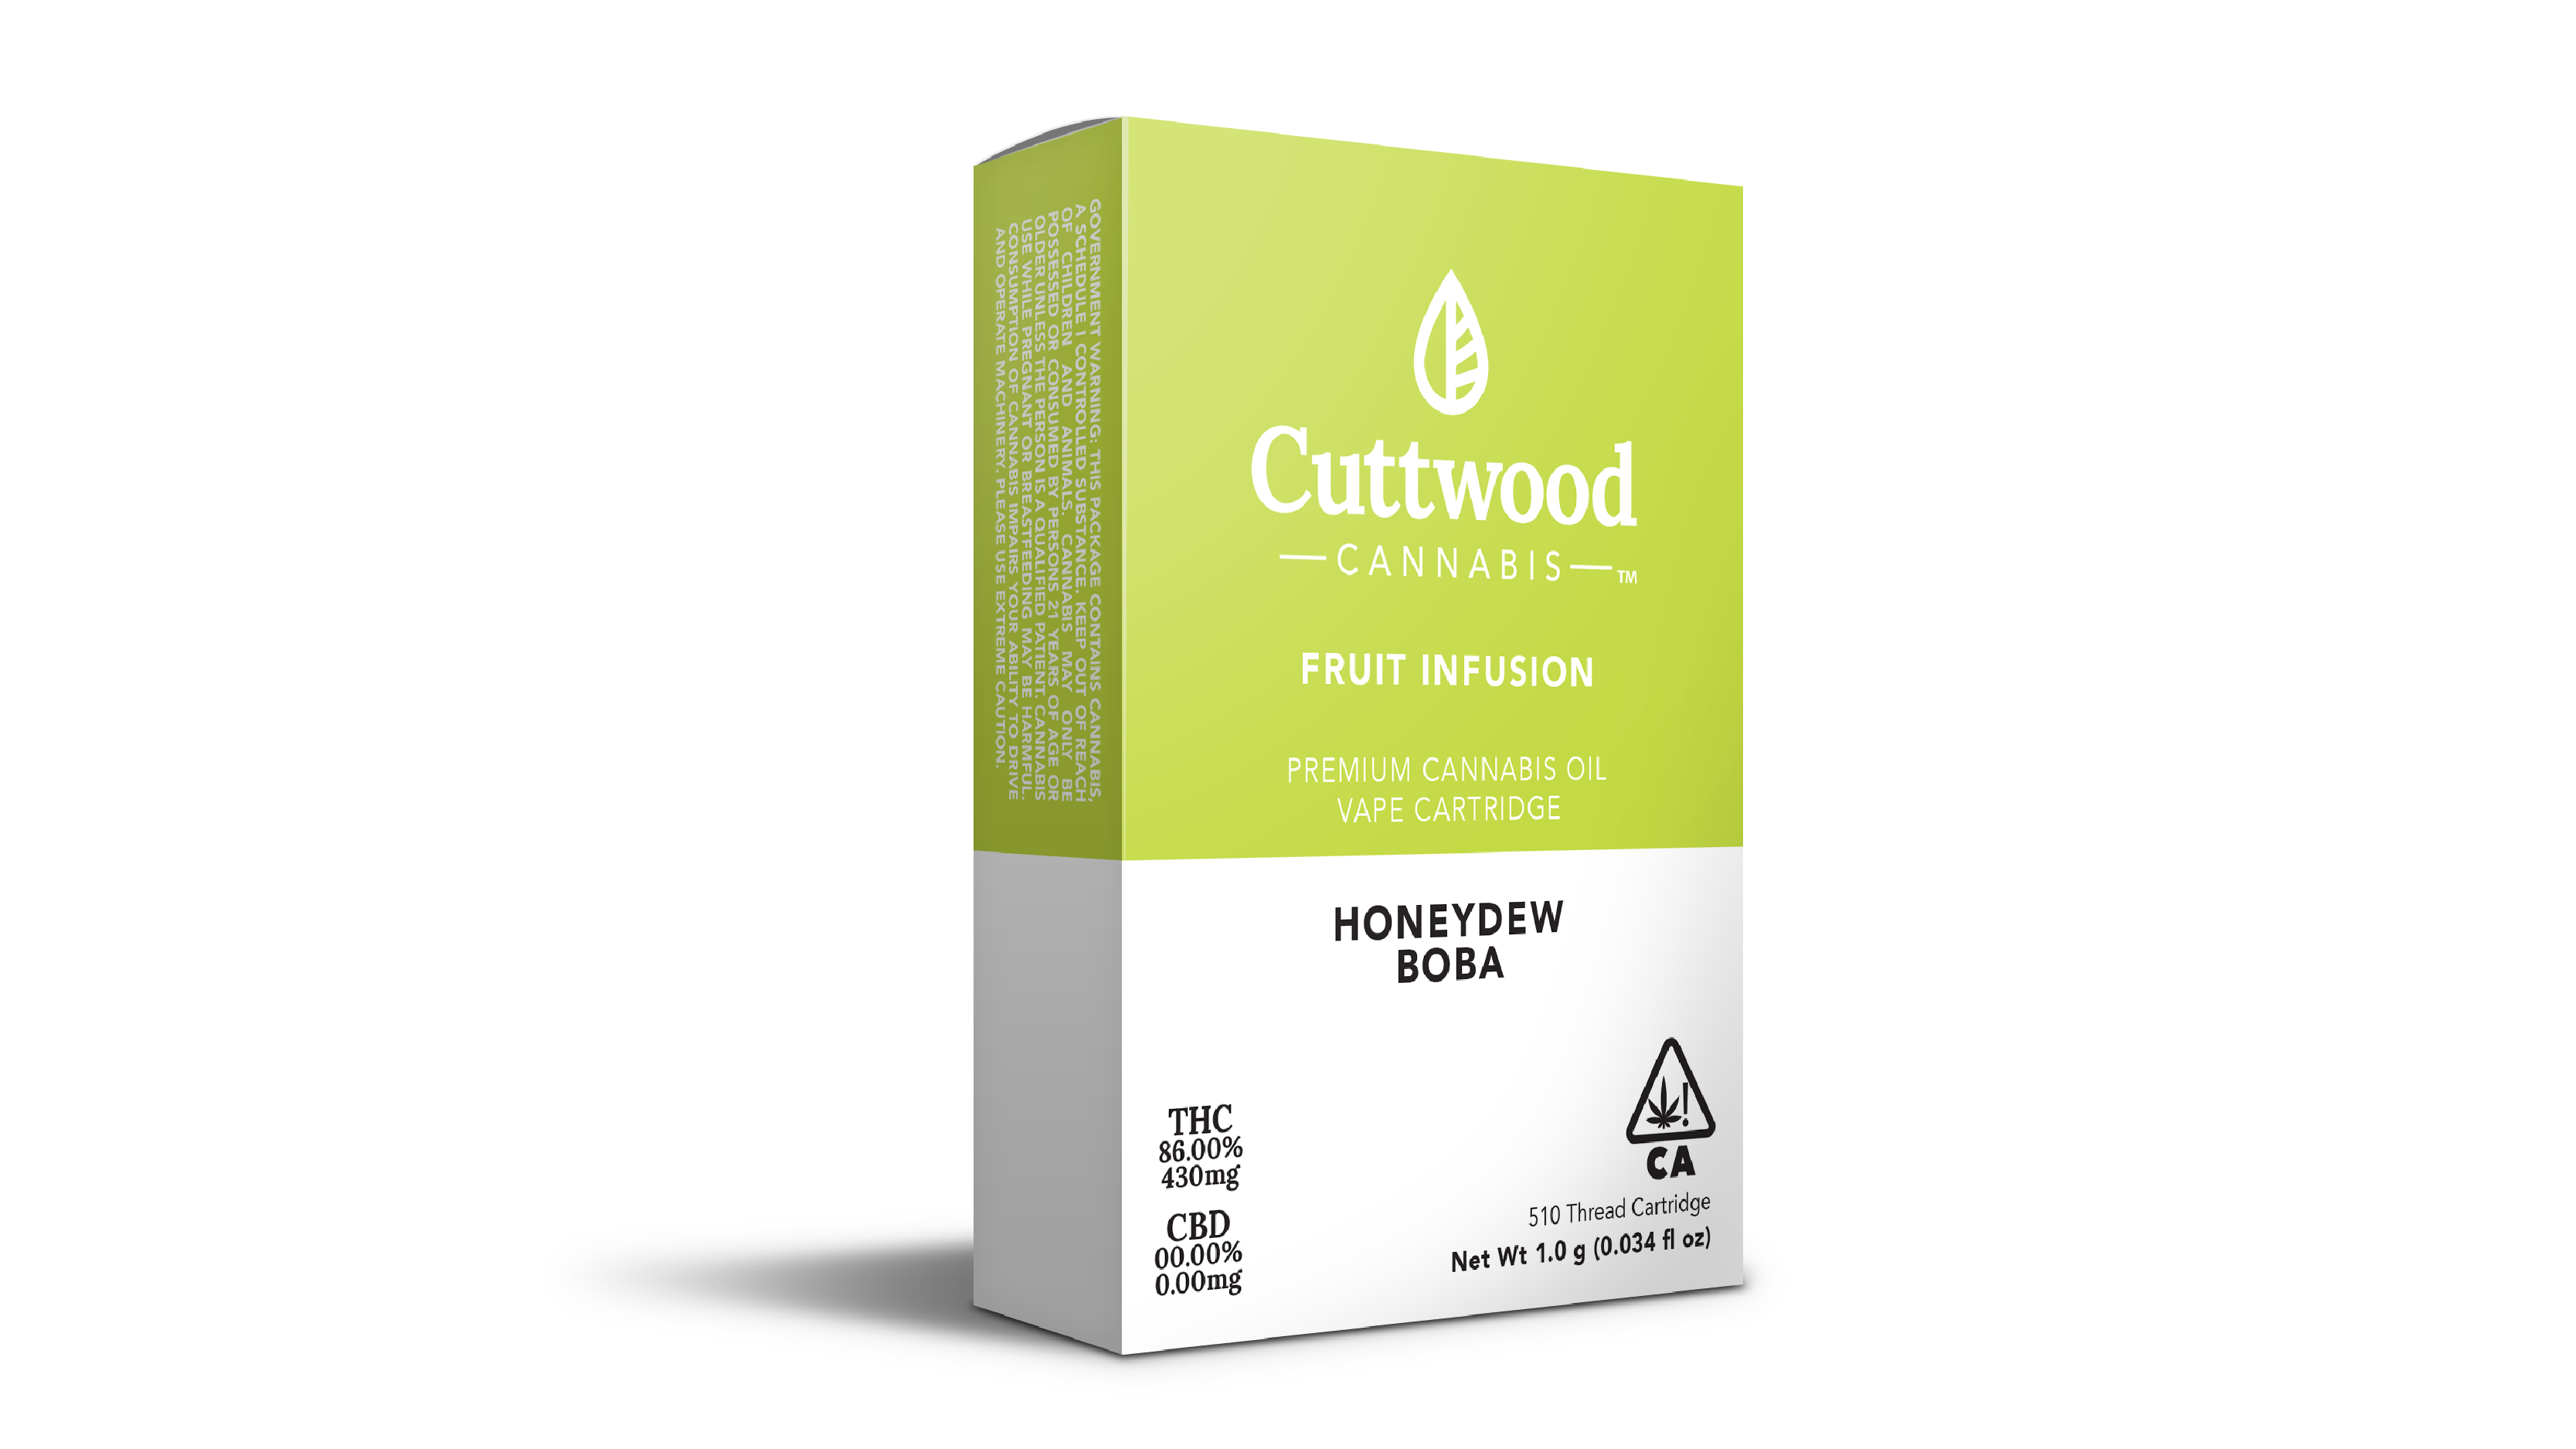 Core Cuttwood Mockup Images-05